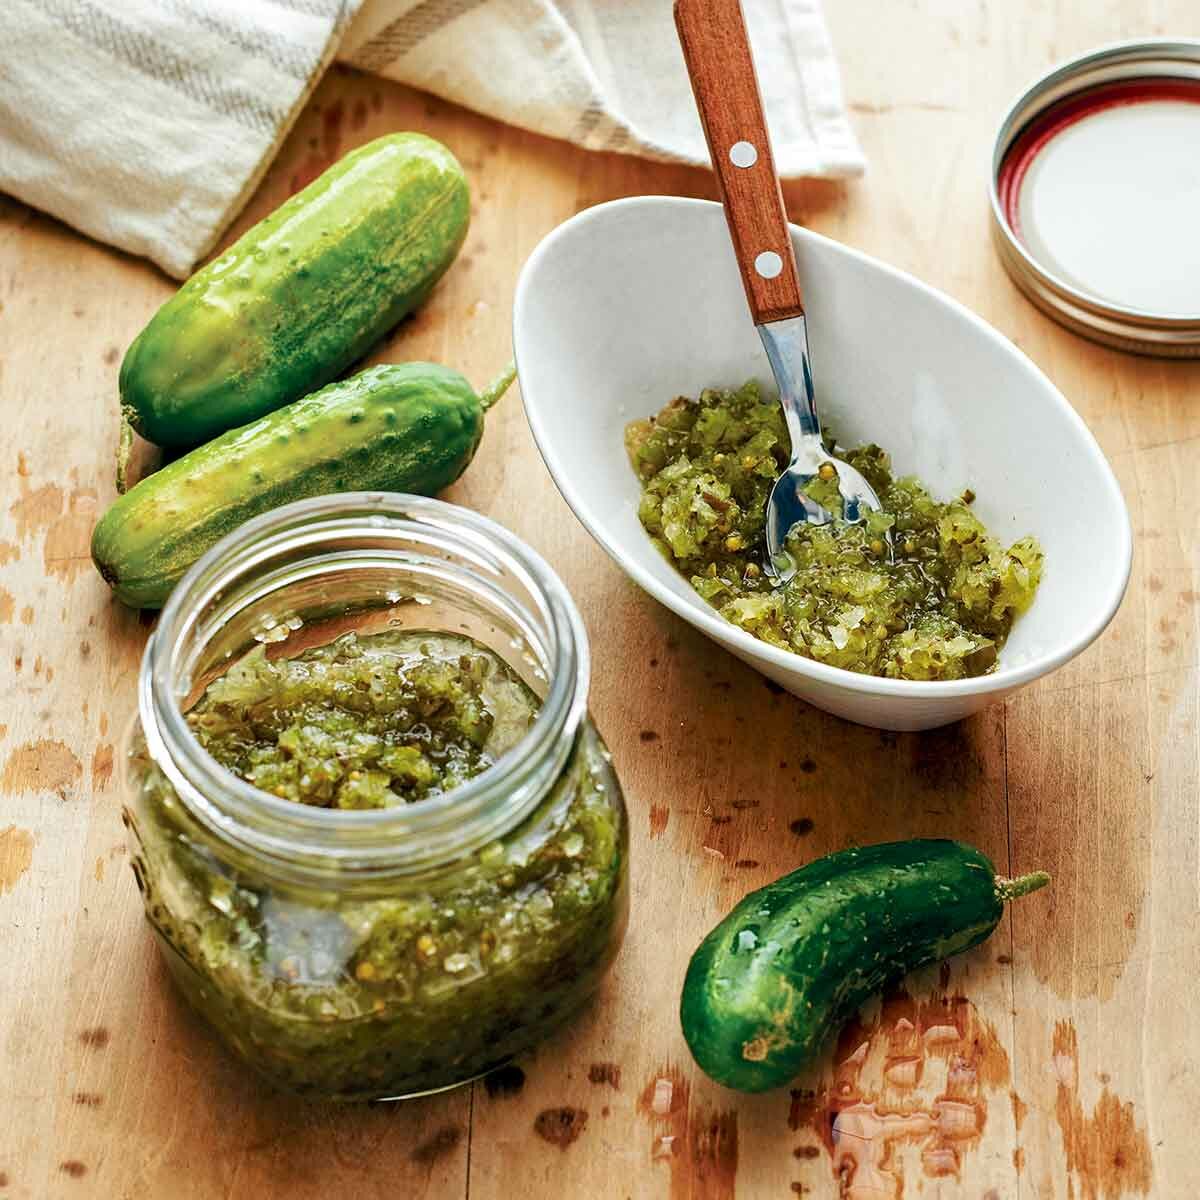 Is sweet relish the same as sweet pickles